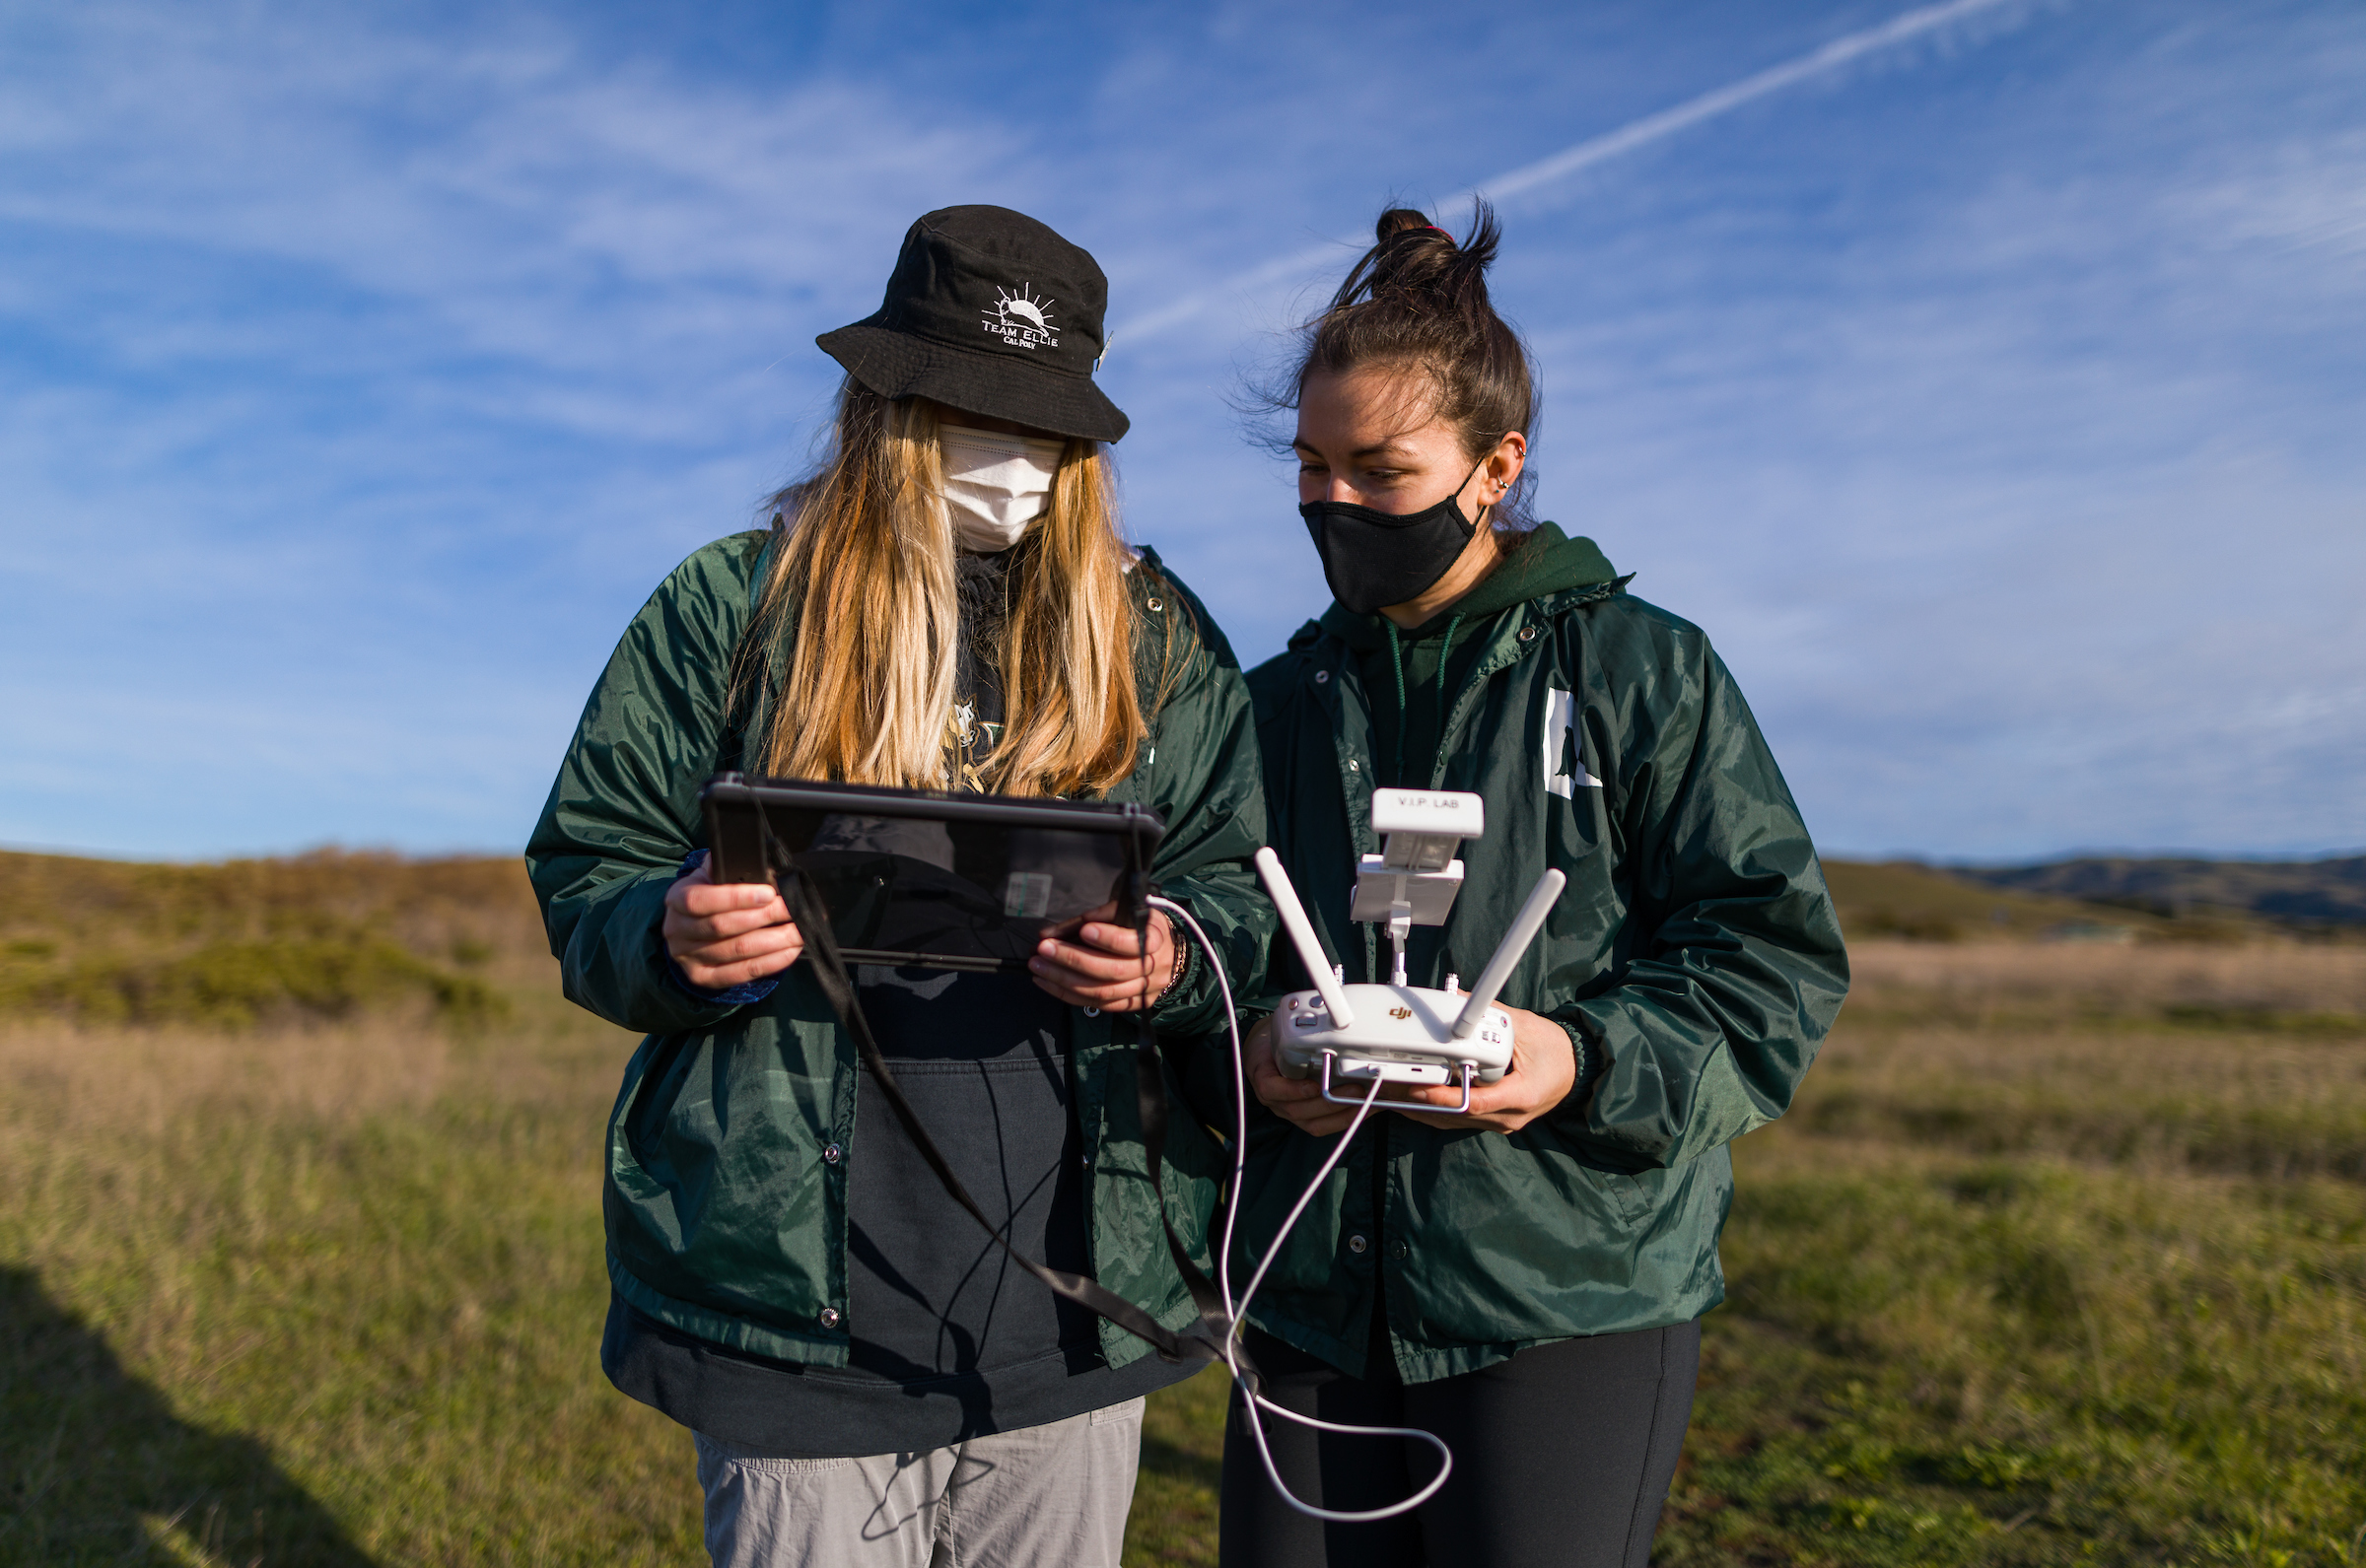 Graduate students Kate Riordan and Molly Murphy operate the aerial drone as it flies above the beach. NMFS permit #22187-02